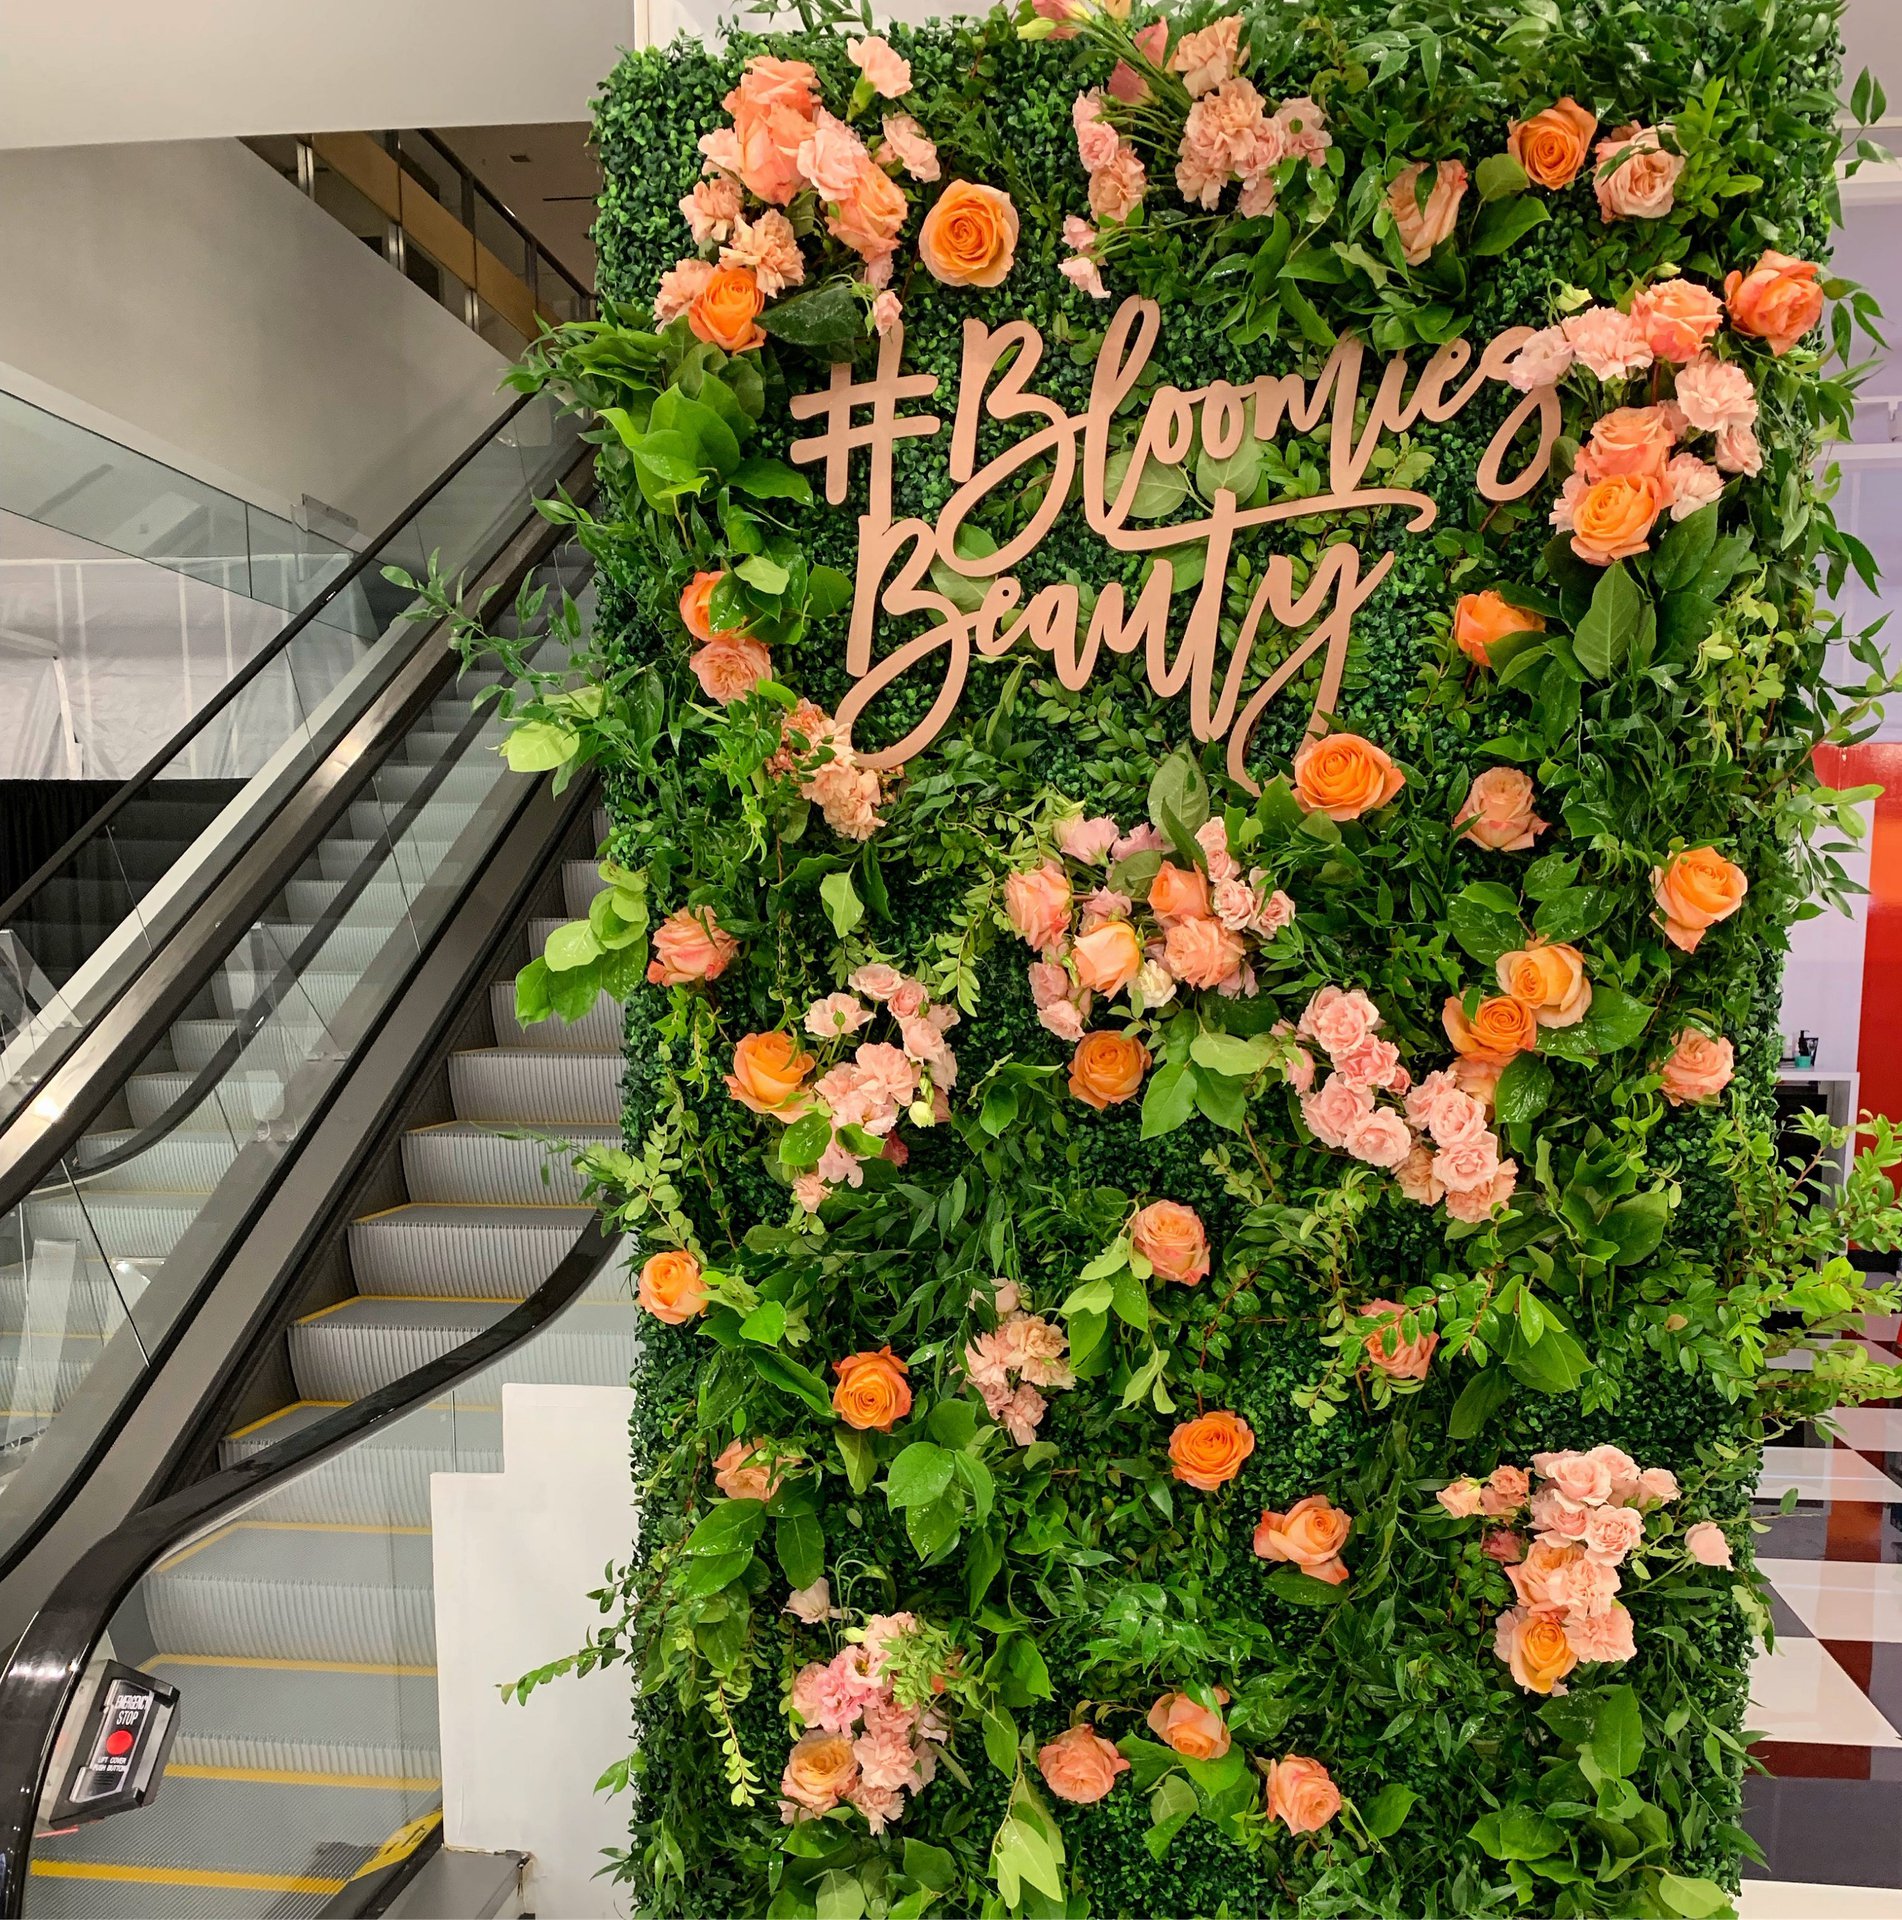 Foamless flower wall by Larkspur Botanicals at the Bloomingdales “Out of this World” beauty event.